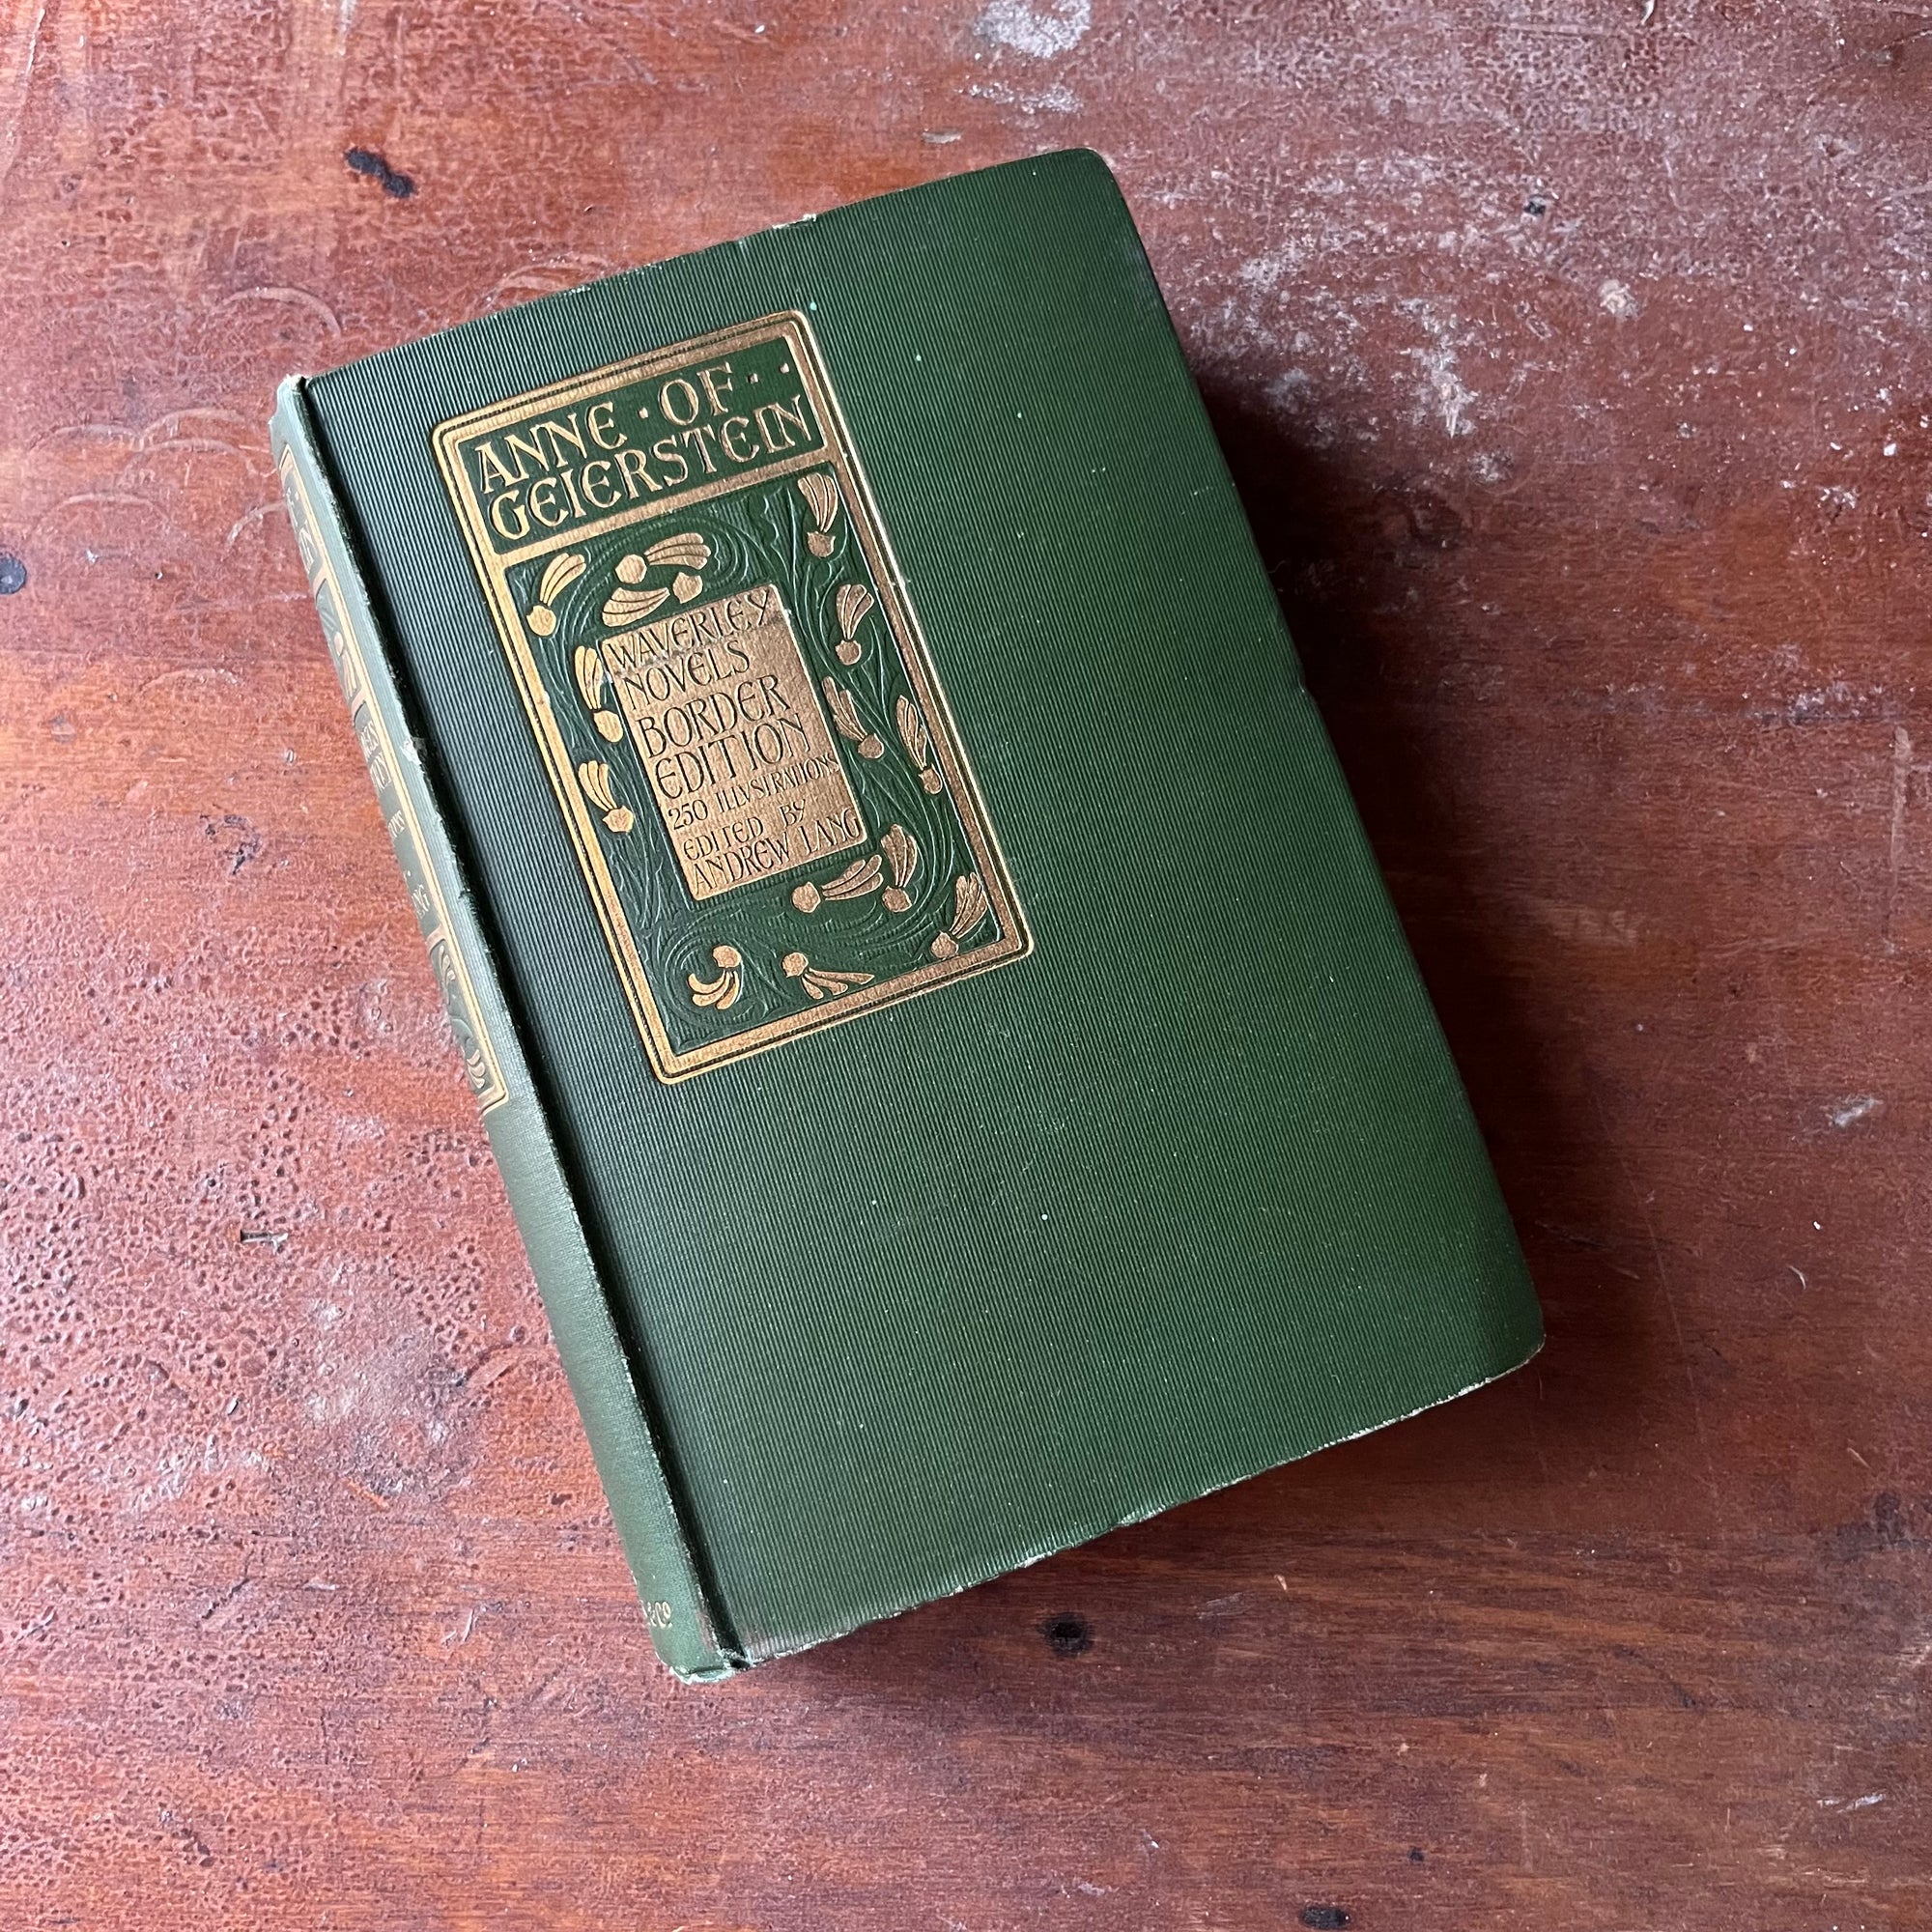 antique book, classic literature - Waverly Novels Border Edition:  Anne of Geierstein written by Sir Walter Scott, Bart. published in 1899-edited by Andrew Lang - view of the embossed front cover in green & gold colors